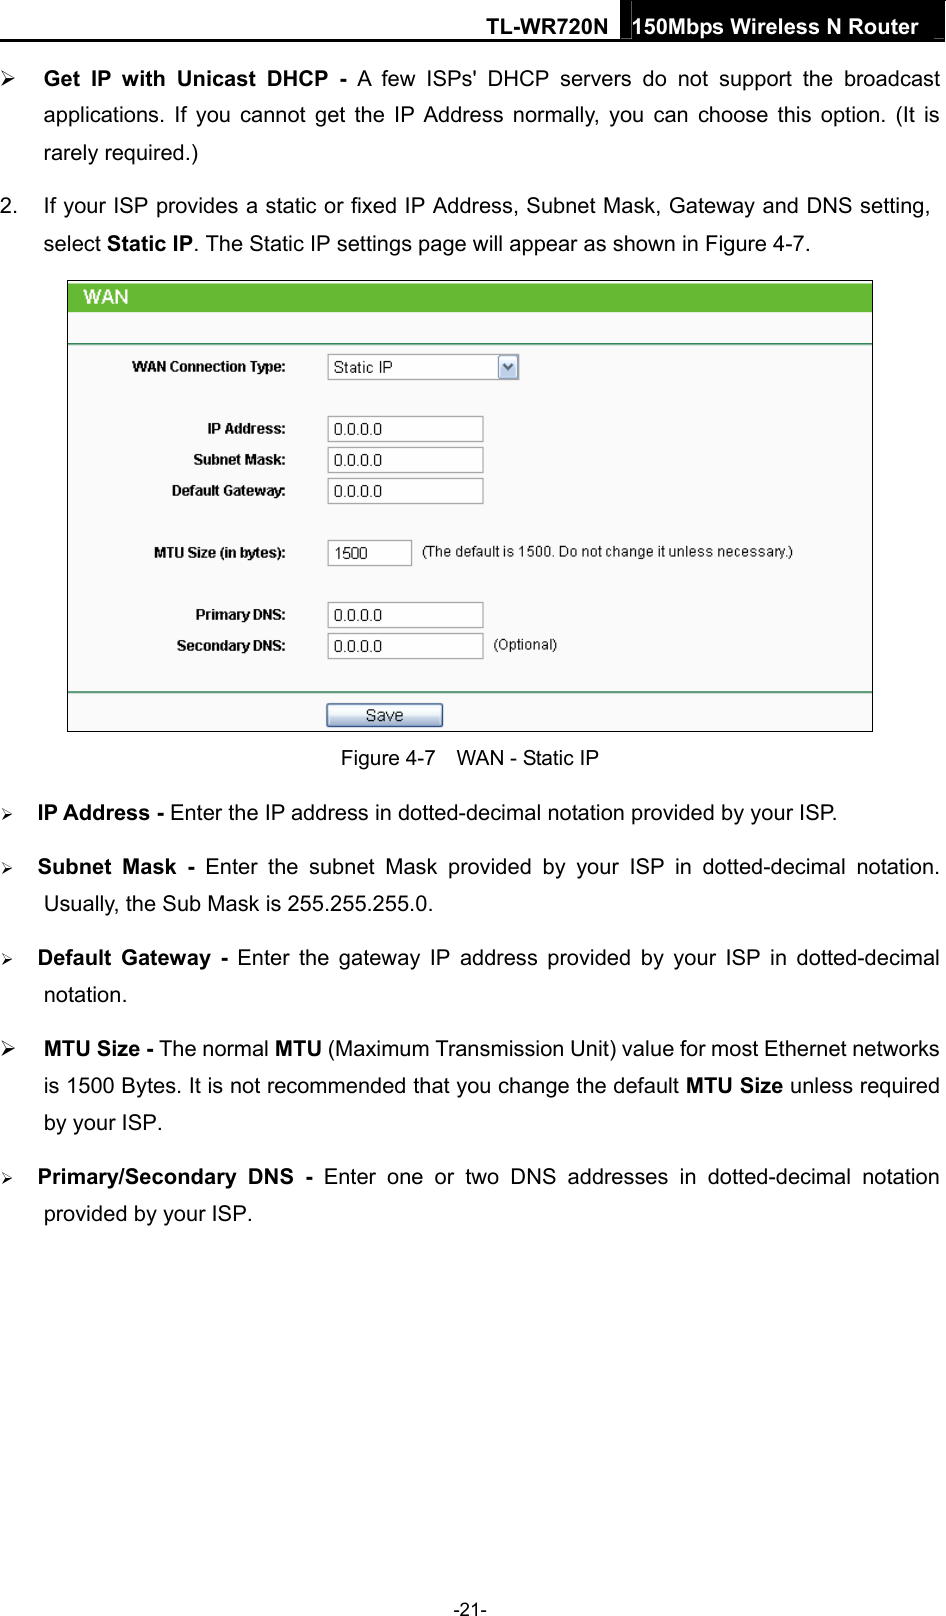 TL-WR720N 150Mbps Wireless N Router   Get IP with Unicast DHCP - A few ISPs&apos; DHCP servers do not support the broadcast applications. If you cannot get the IP Address normally, you can choose this option. (It is rarely required.) 2.  If your ISP provides a static or fixed IP Address, Subnet Mask, Gateway and DNS setting, select Static IP. The Static IP settings page will appear as shown in Figure 4-7.  Figure 4-7    WAN - Static IP  IP Address - Enter the IP address in dotted-decimal notation provided by your ISP.  Subnet Mask - Enter the subnet Mask provided by your ISP in dotted-decimal notation. Usually, the Sub Mask is 255.255.255.0.  Default Gateway - Enter the gateway IP address provided by your ISP in dotted-decimal notation.   MTU Size - The normal MTU (Maximum Transmission Unit) value for most Ethernet networks is 1500 Bytes. It is not recommended that you change the default MTU Size unless required by your ISP.  Primary/Secondary DNS - Enter one or two DNS addresses in dotted-decimal notation provided by your ISP.   -21- 